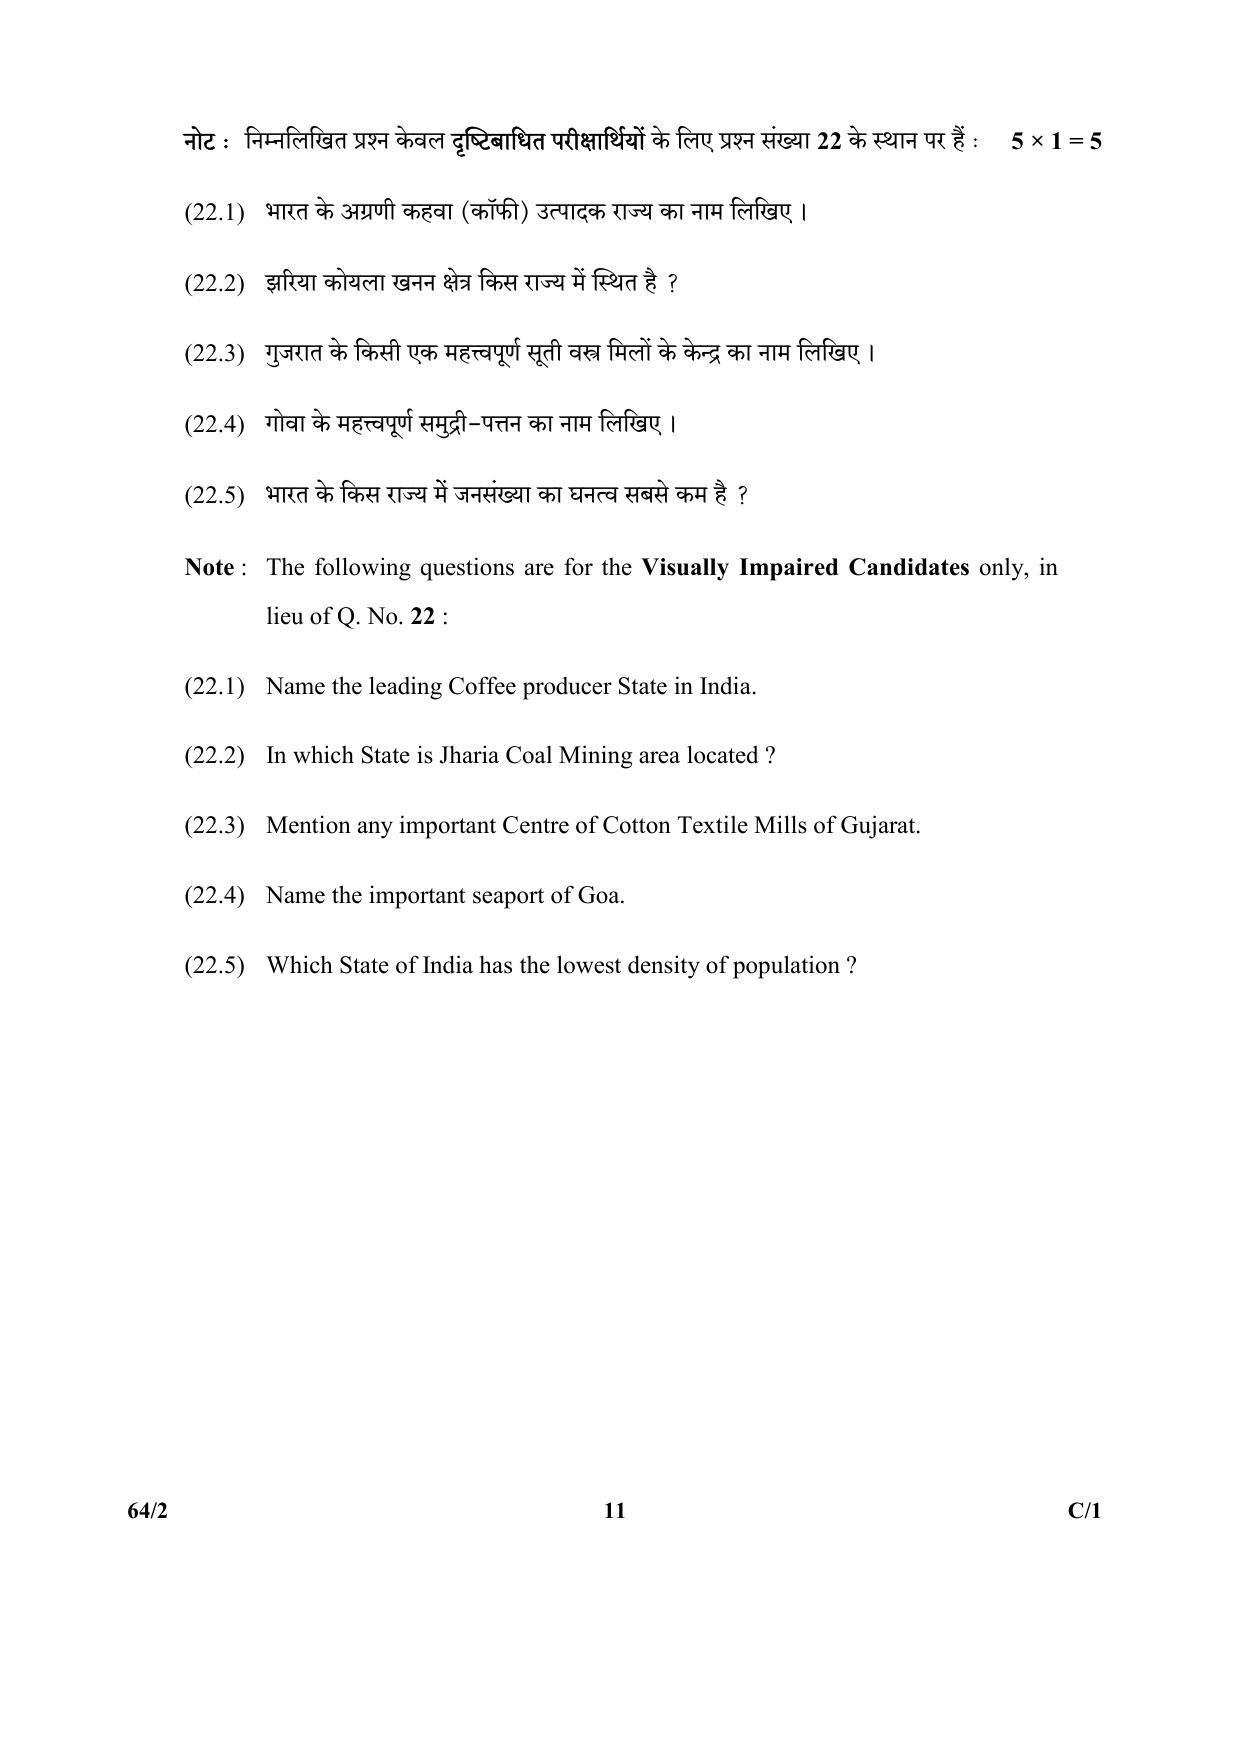 CBSE Class 12 64-2 (Geography) 2018 Compartment Question Paper - Page 11